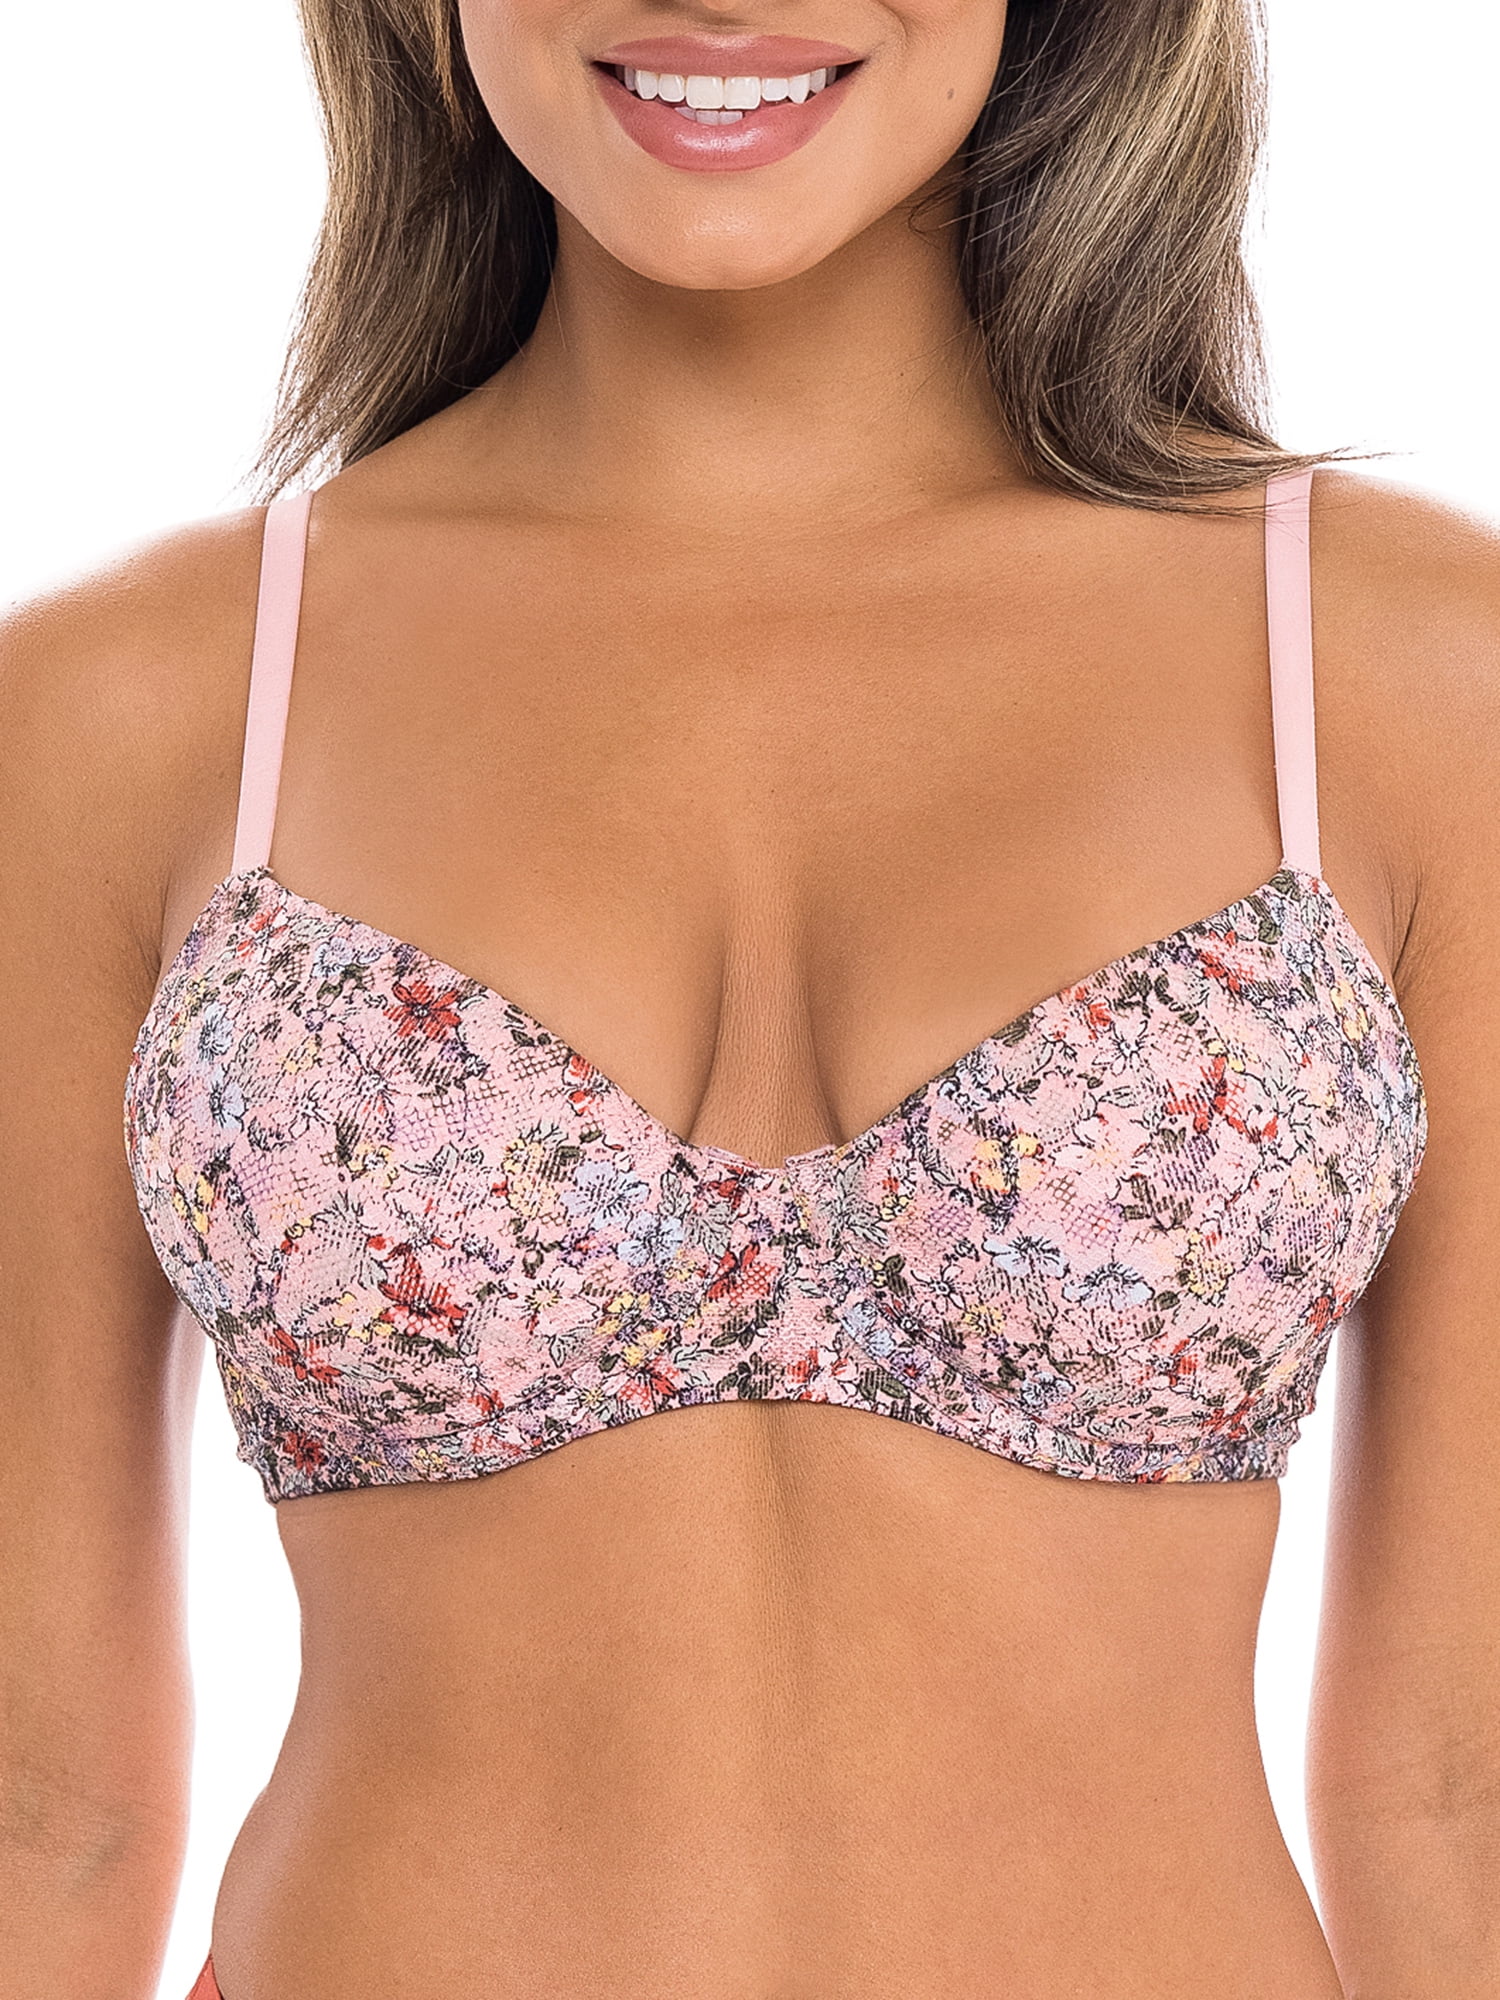 No Boundaries Women's and Juniors' Allover Lace Push Up Bra